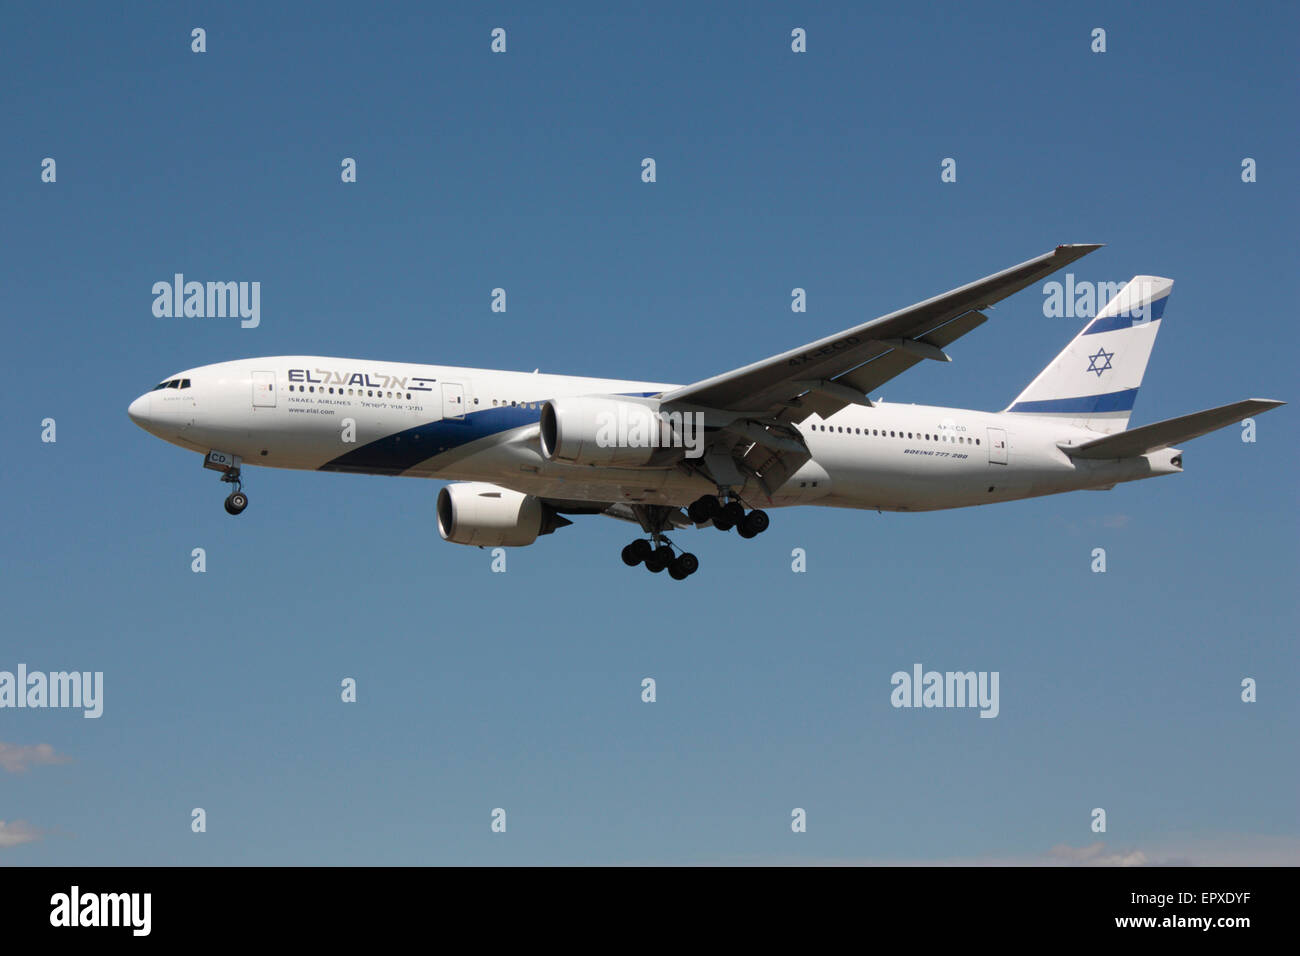 Commercial air travel. El Al Israel Airlines Boeing 777-200ER passenger aeroplane on approach Stock Photo